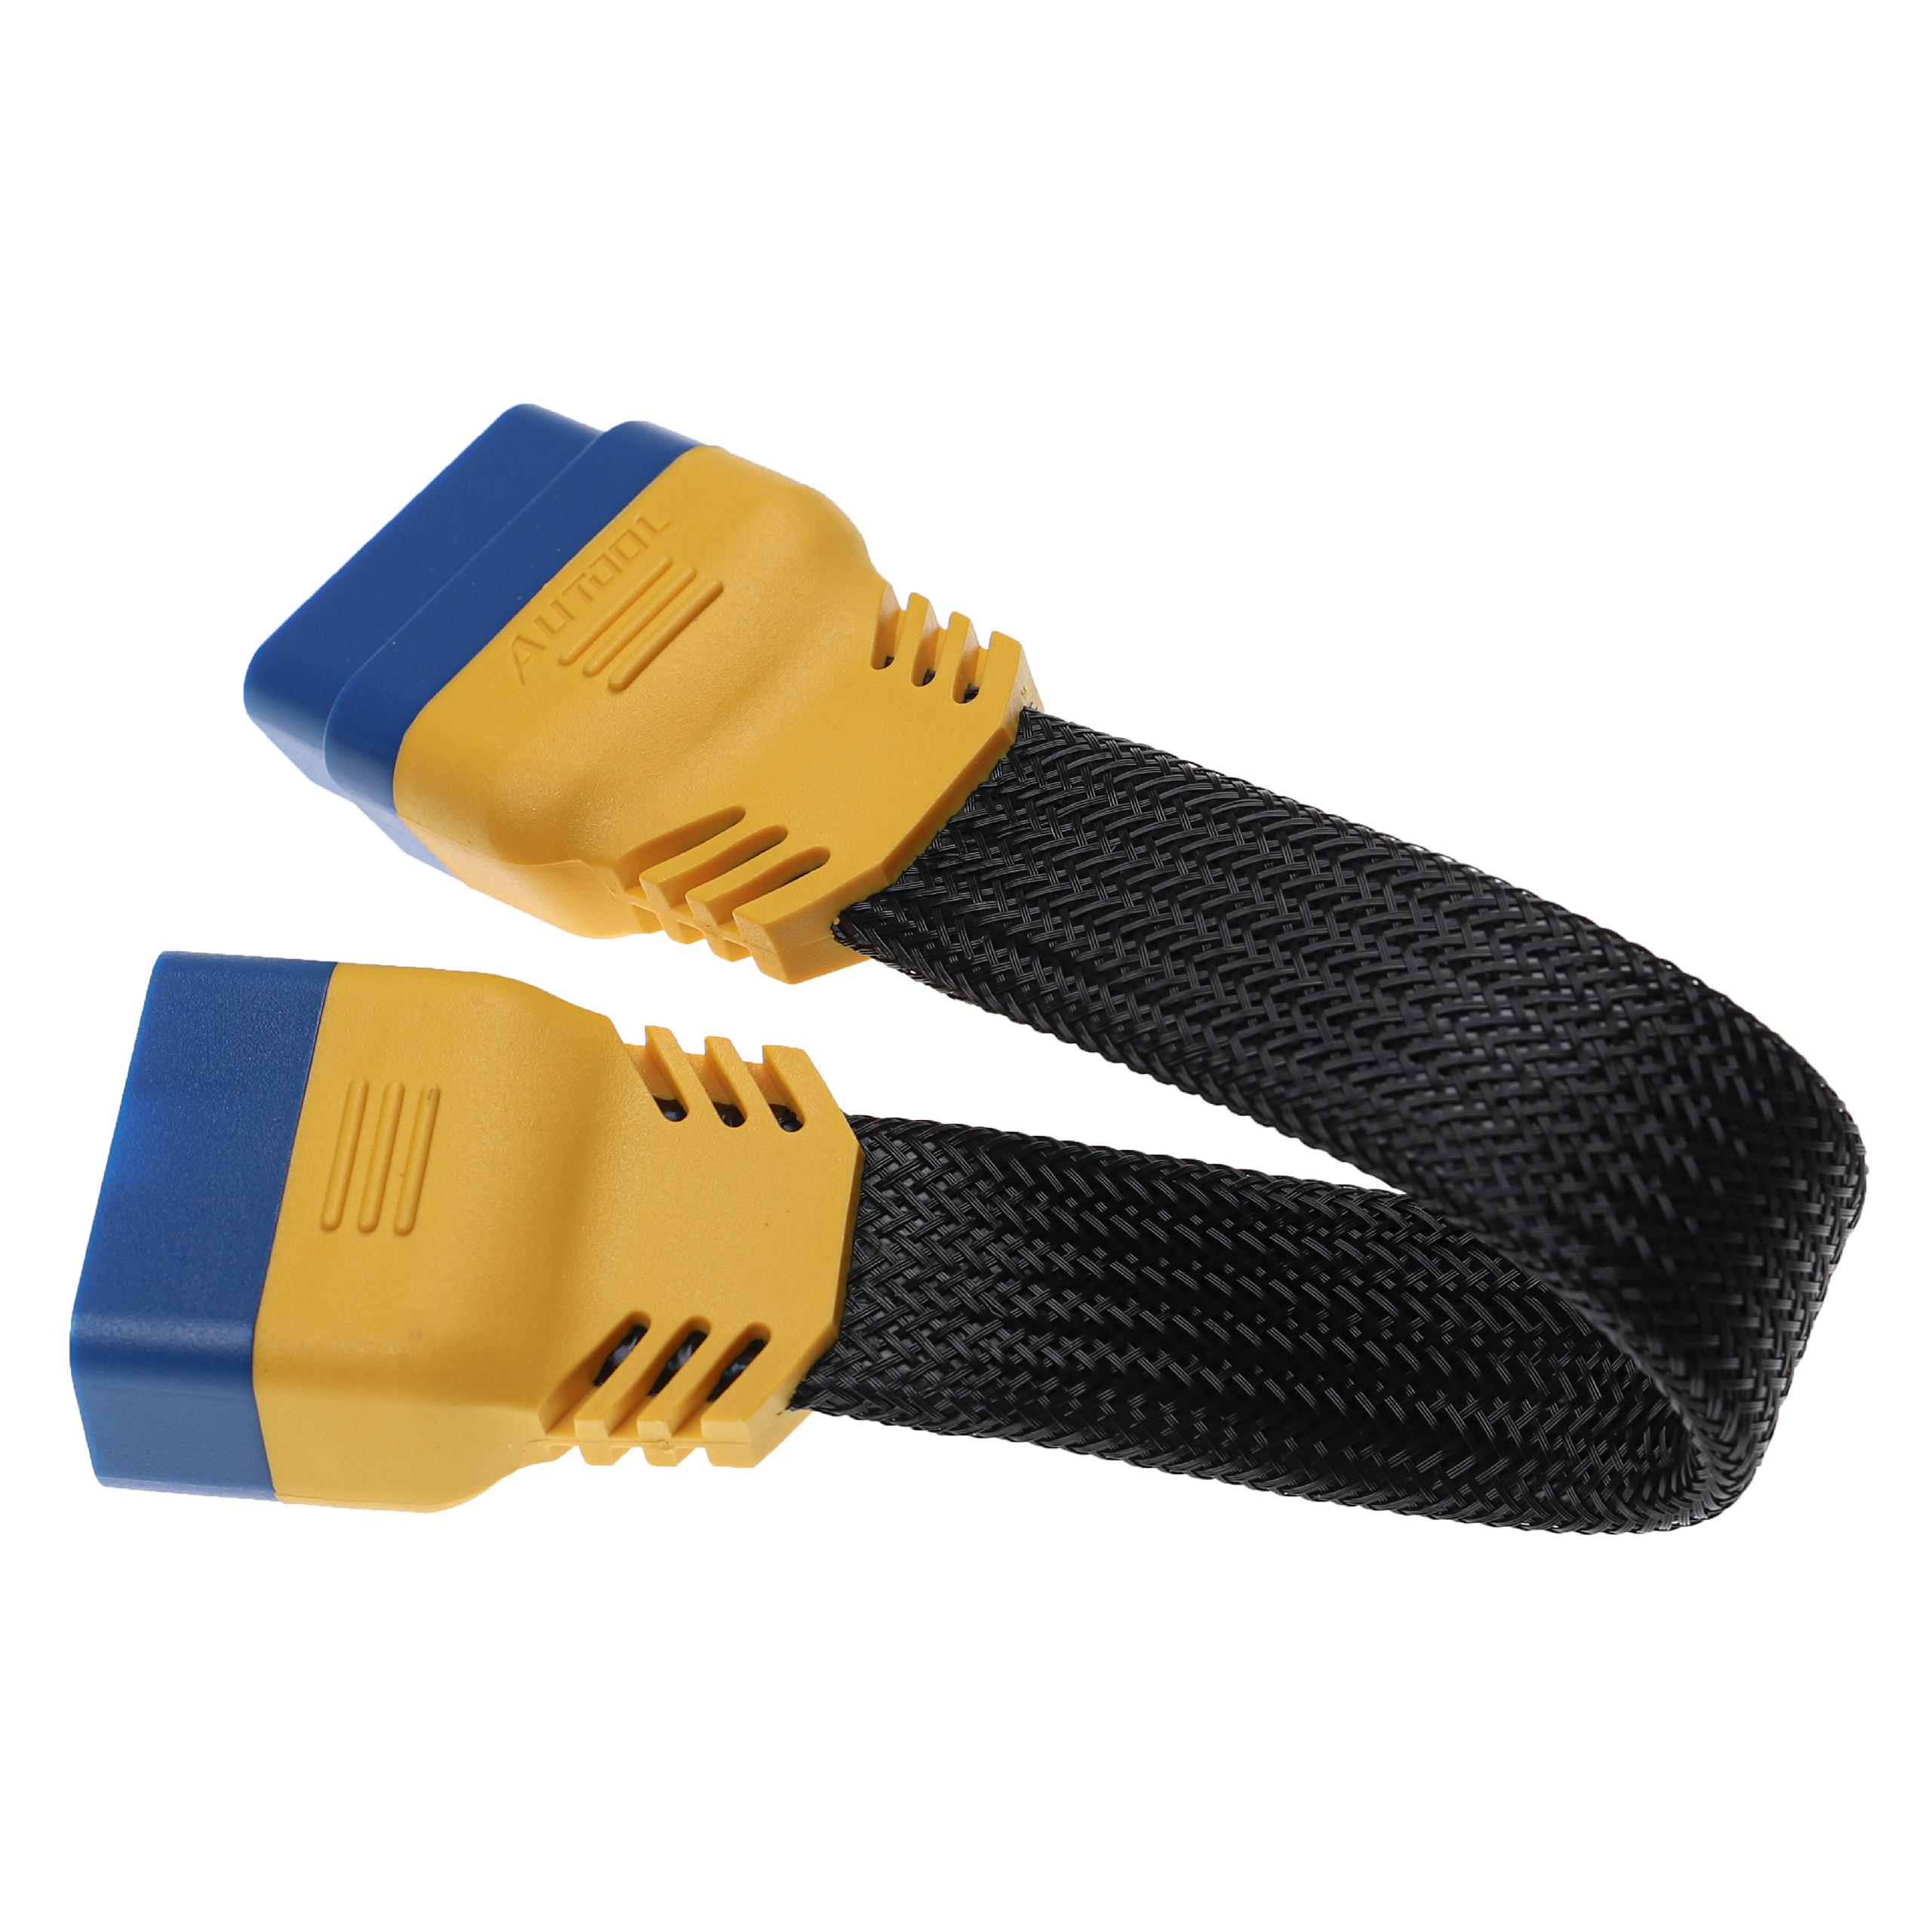 vhbw OBD2 Extension Cable 16 Pin (f) to 16 Pin (m) for LKW, Car, Vehicle - 20 cm